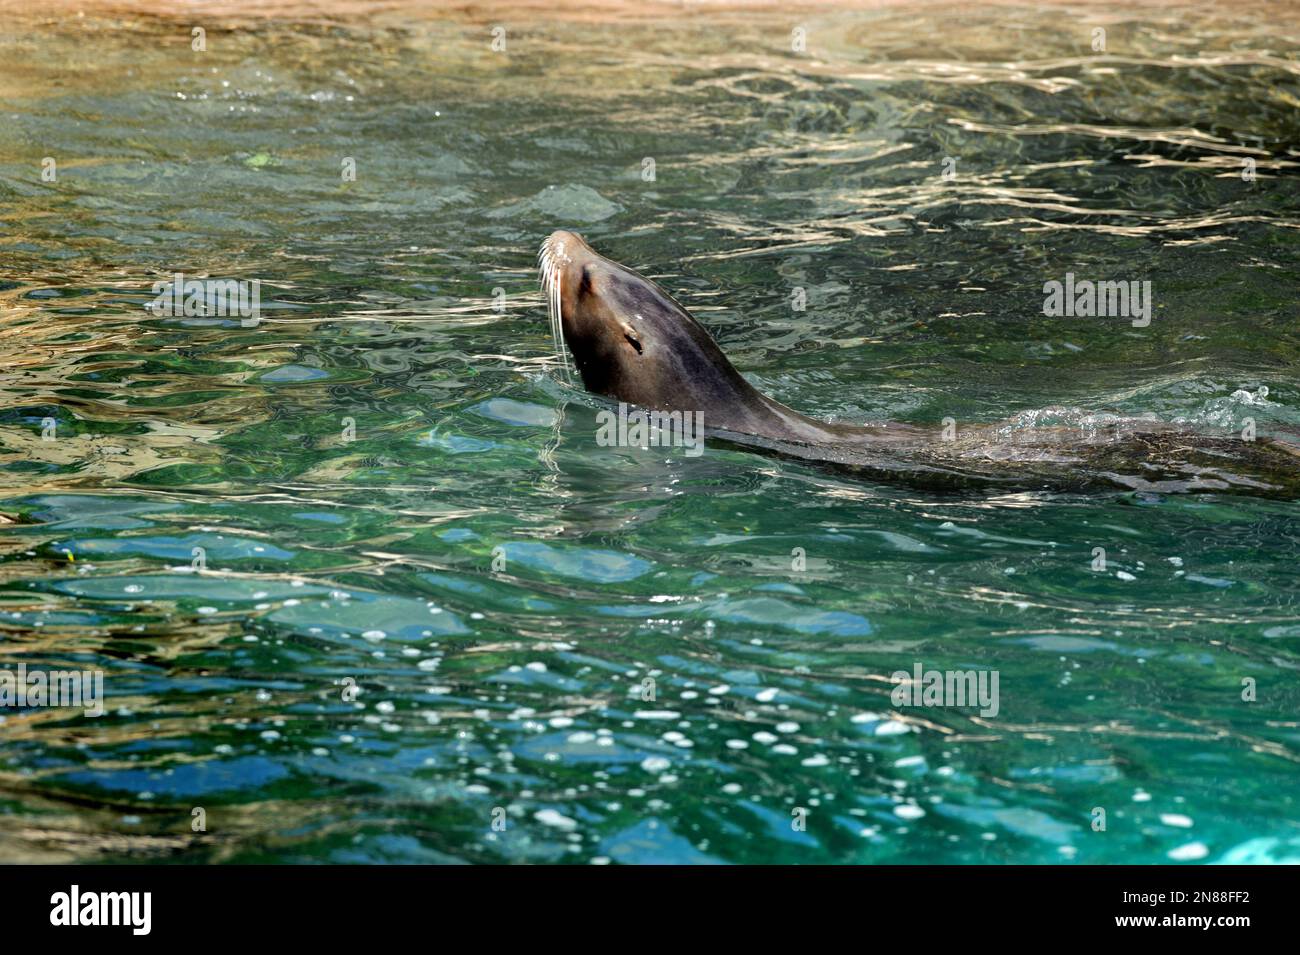 View on Sea Lion in the water close up Stock Photo